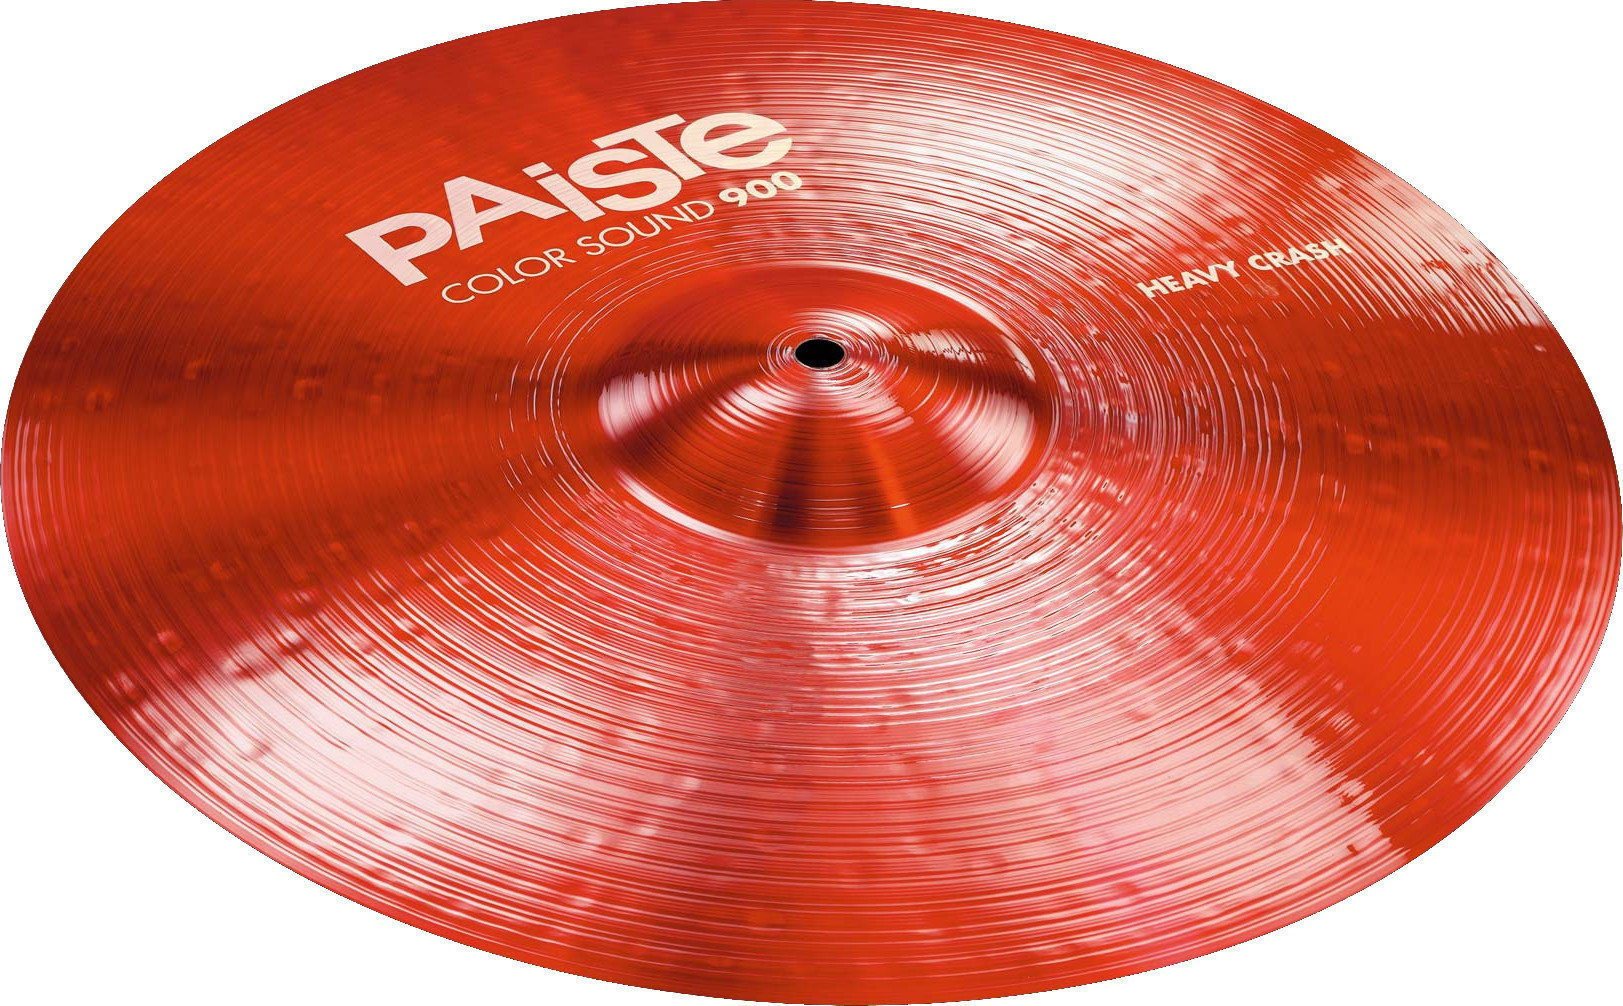 Crash Cymbal Paiste Color Sound 900  Heavy Crash Cymbal 16" Red